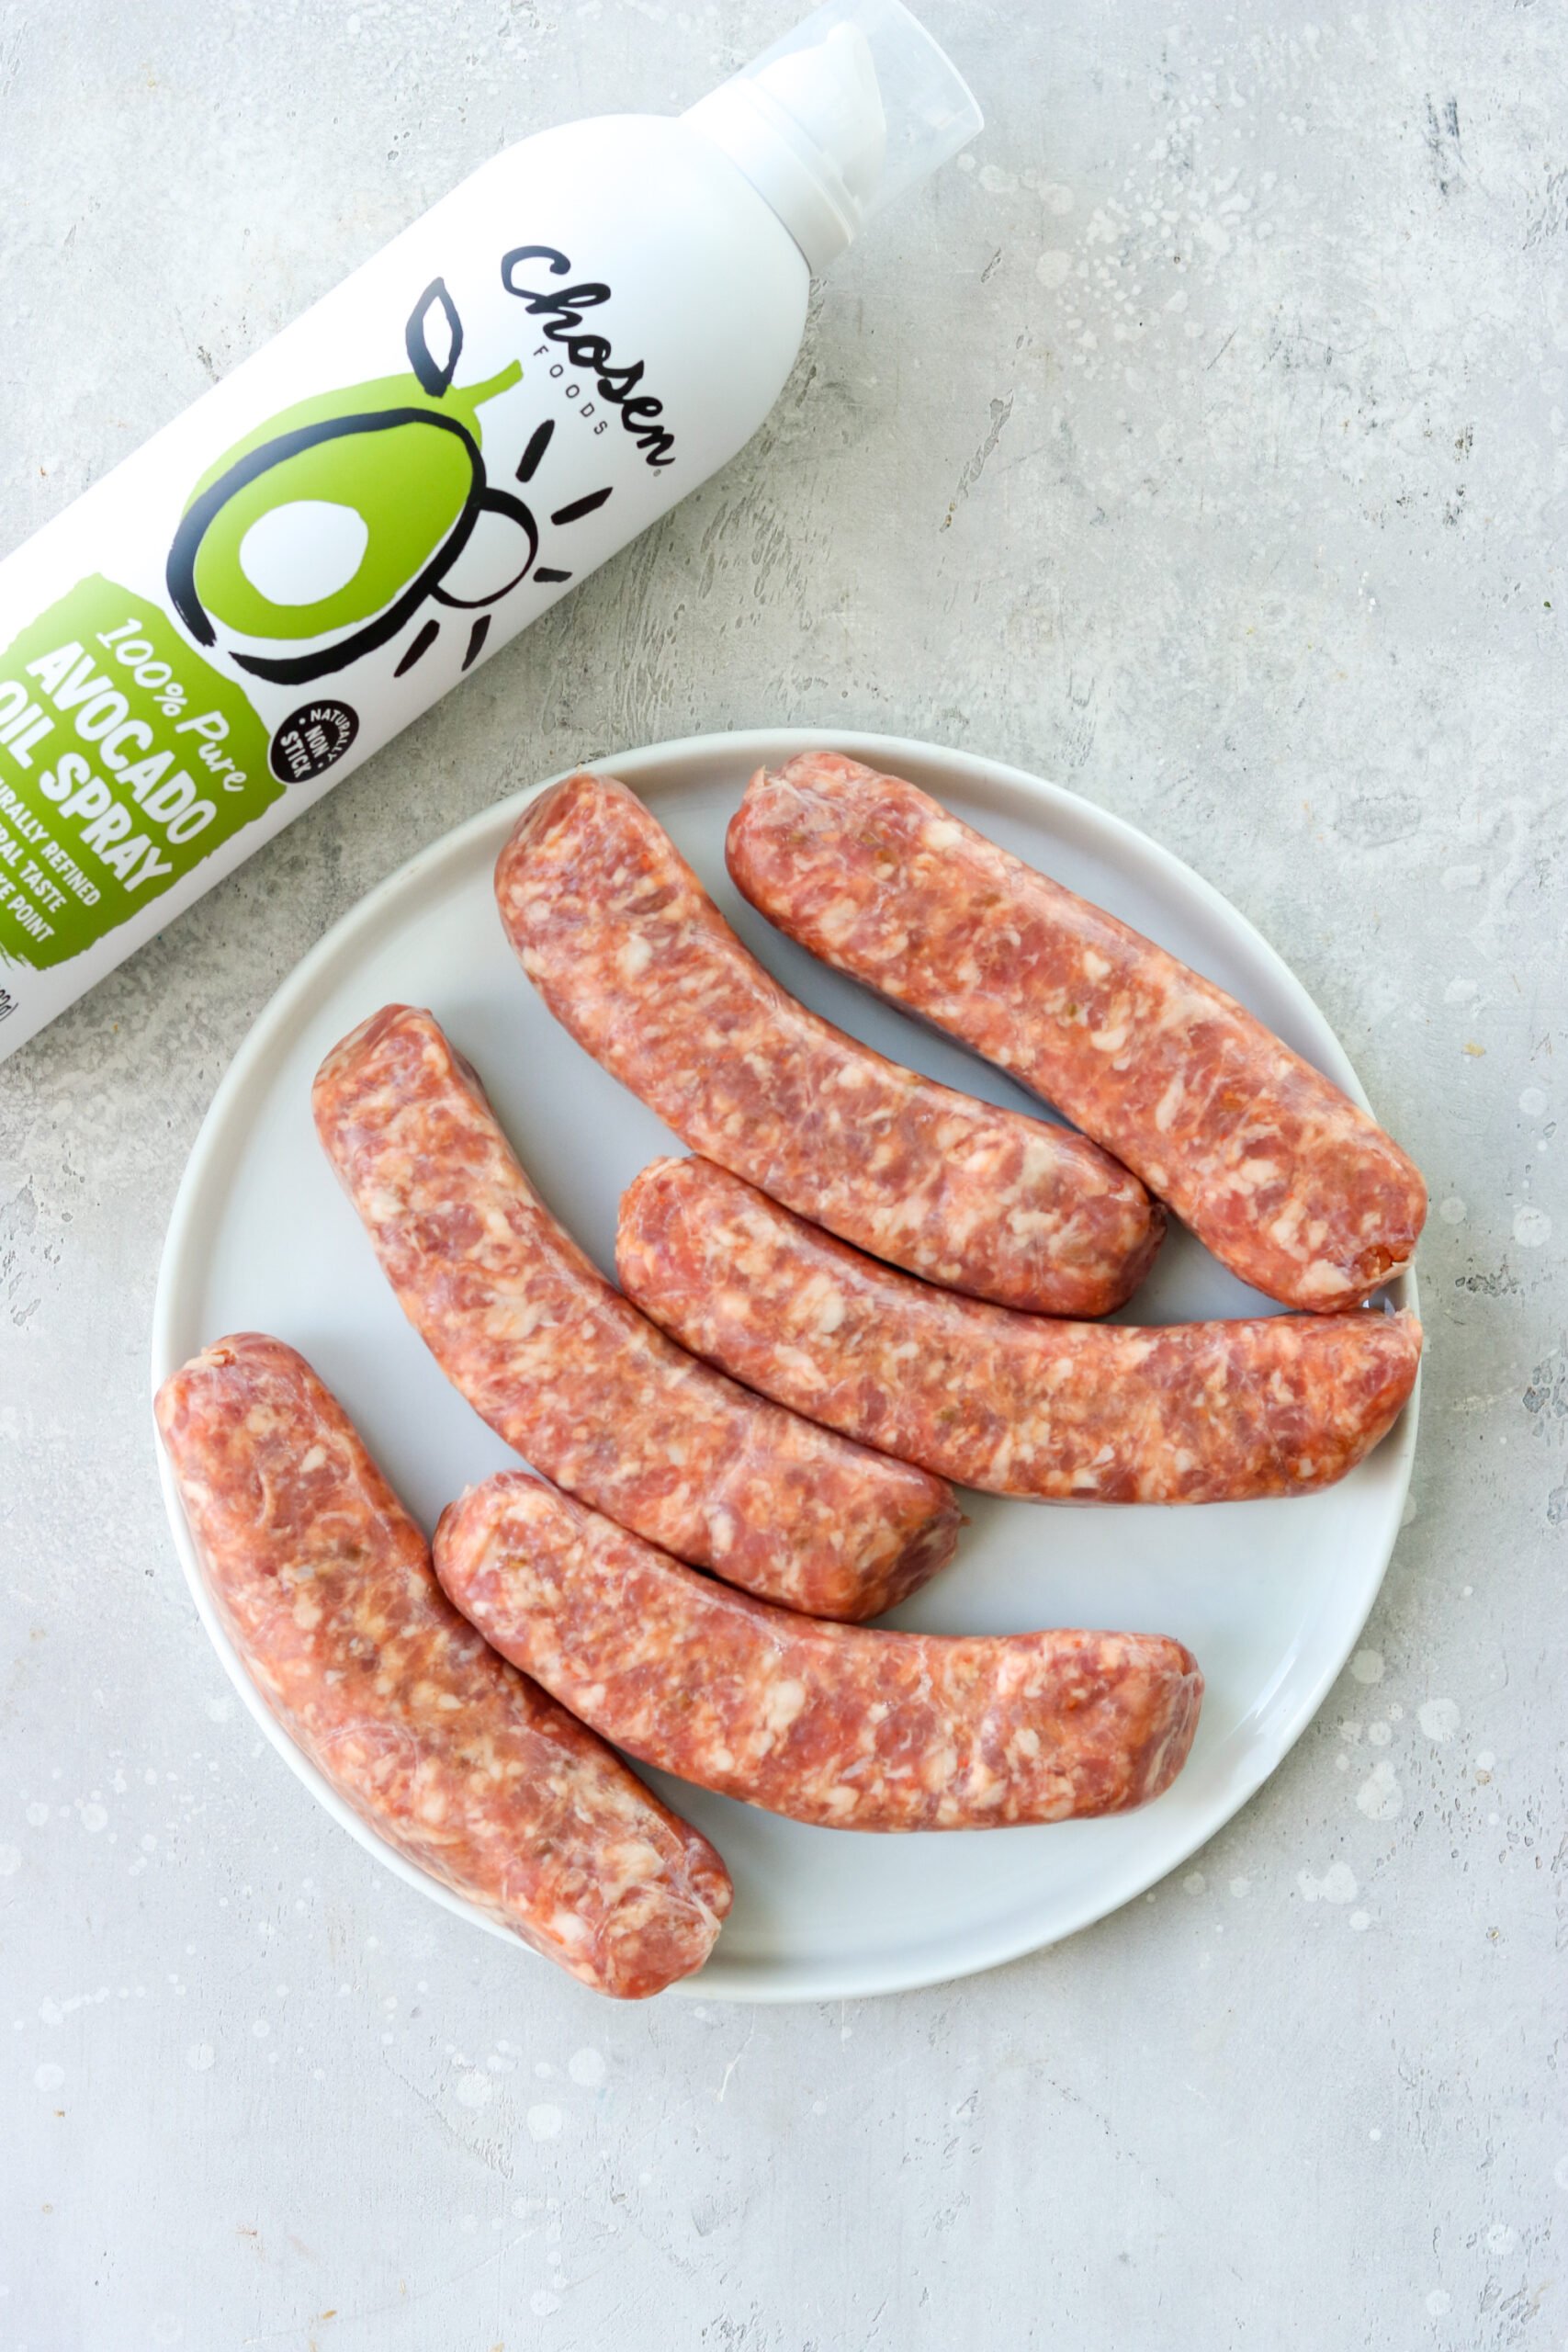 raw sausages on a plate with avocado oil next to it